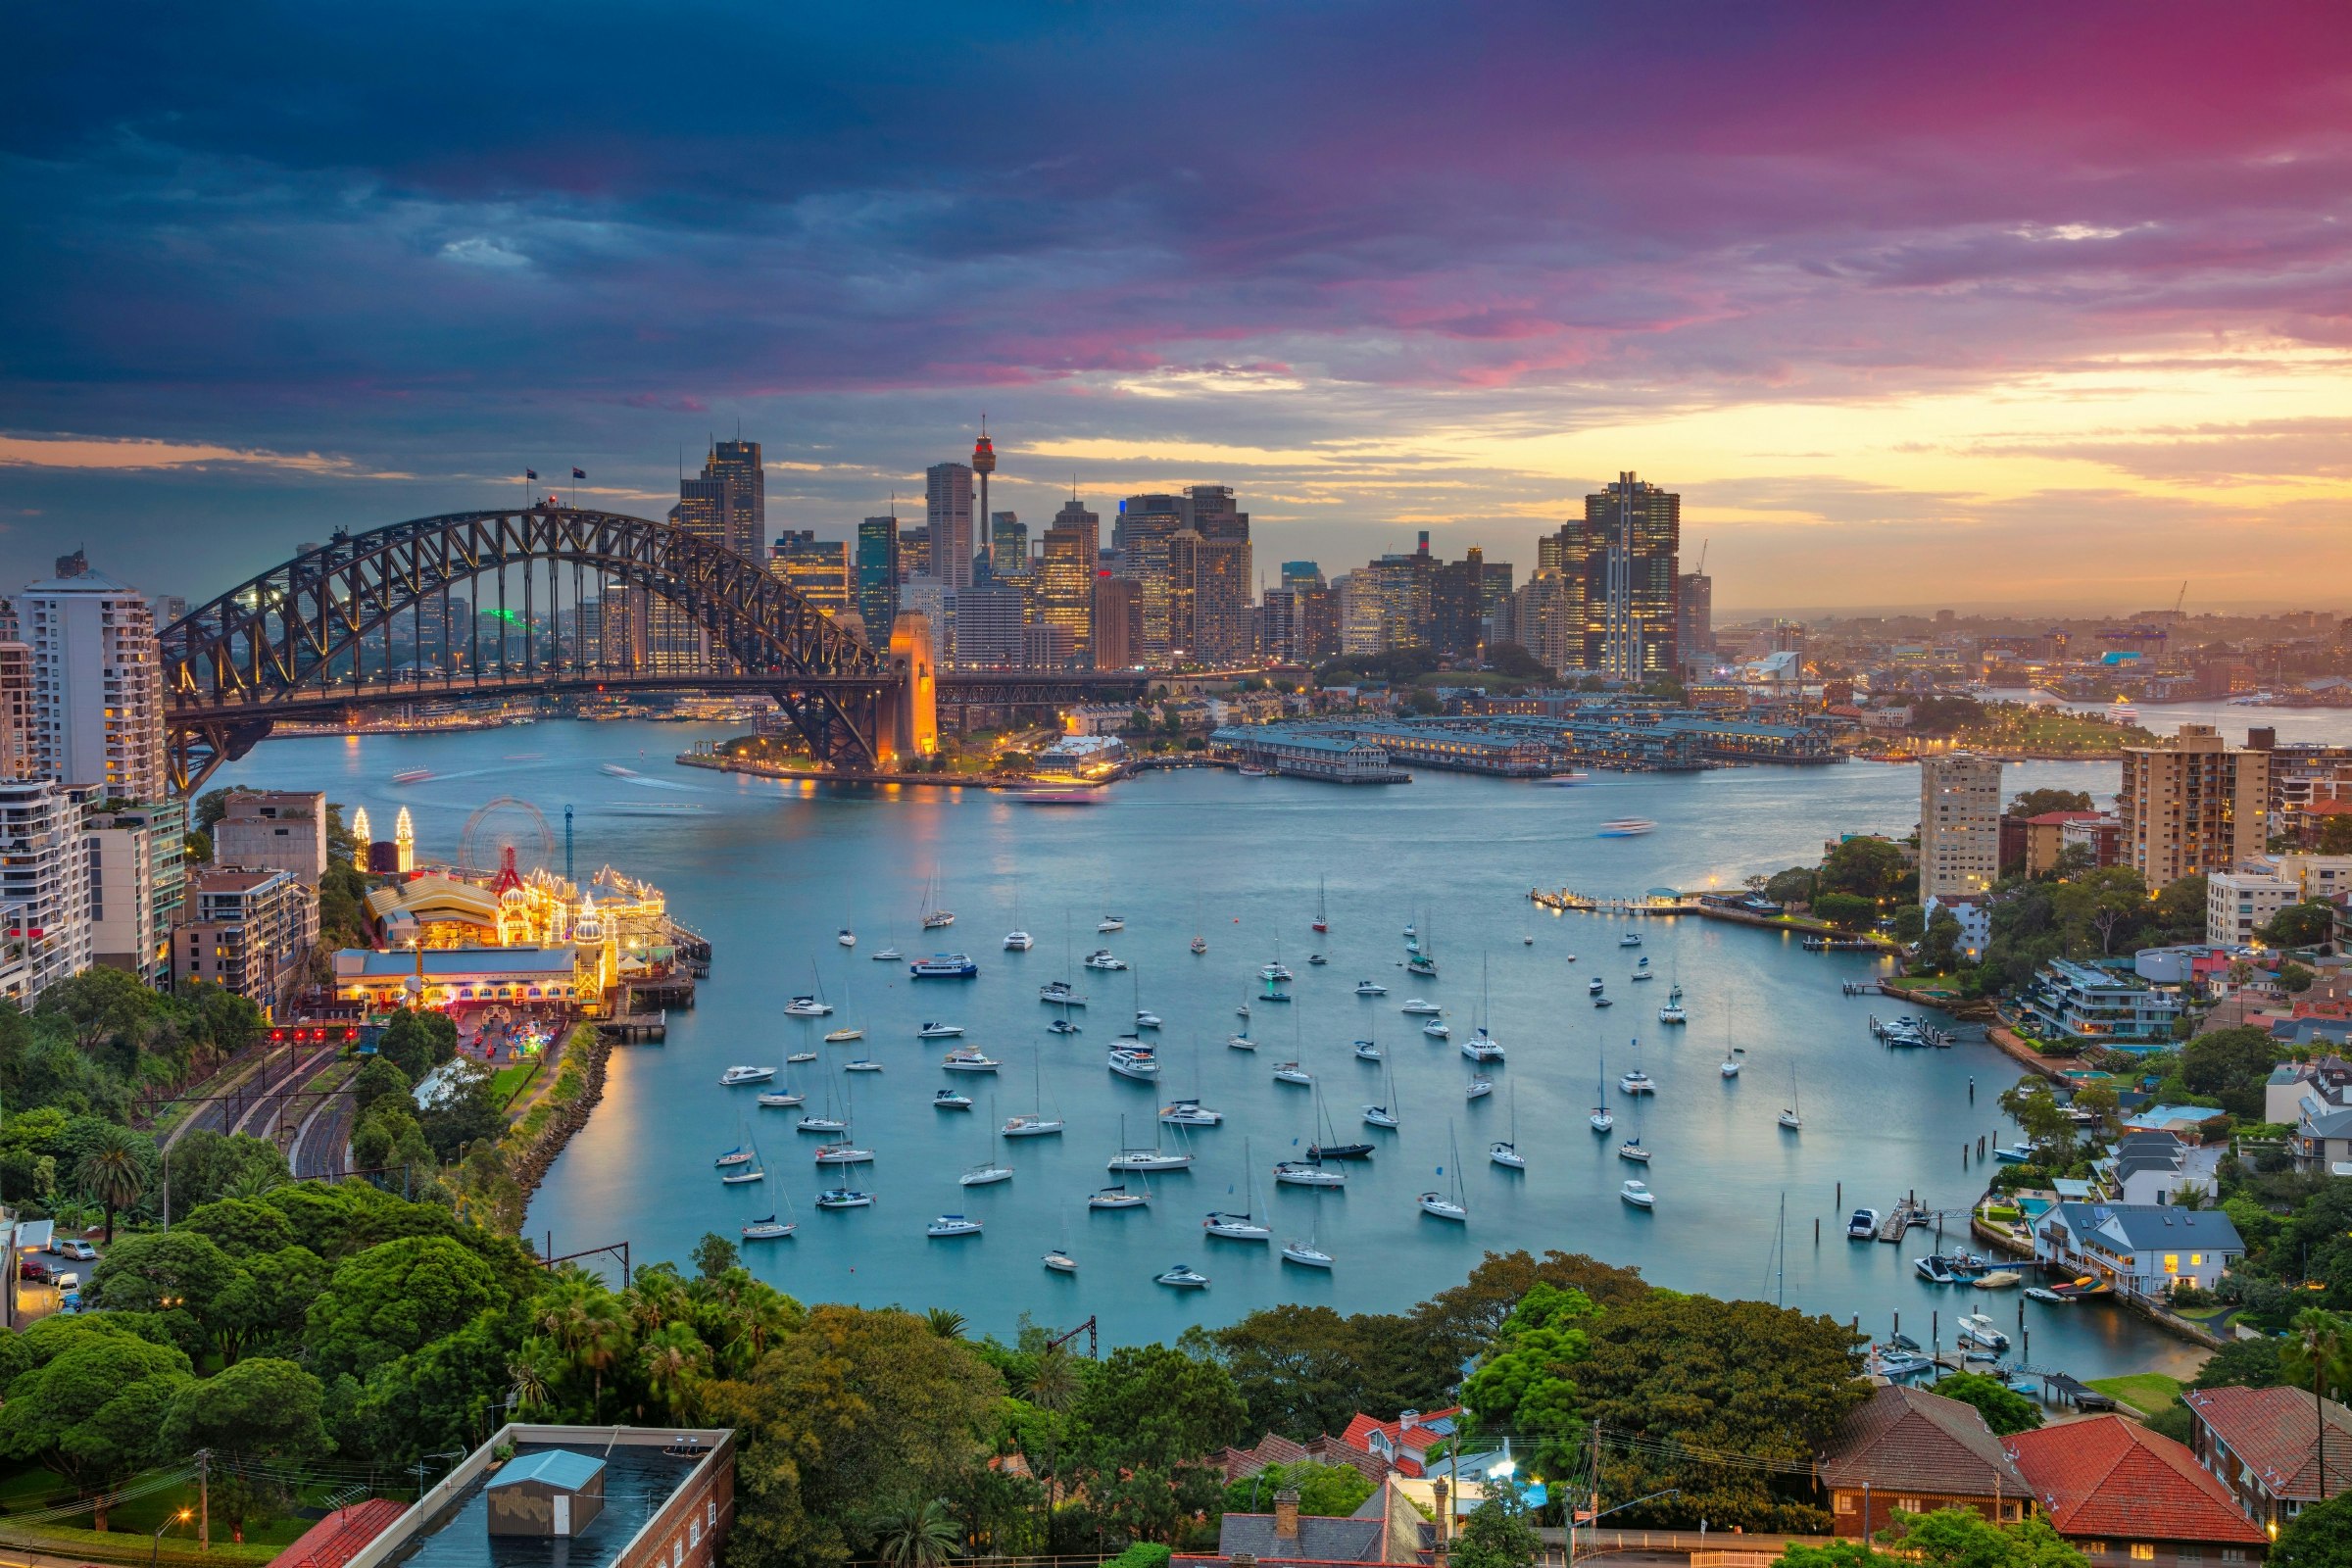 A sunset scene of Sydney Harbour; many boats bob in the water with the iconic Sydney Harbour Bridge in the background.